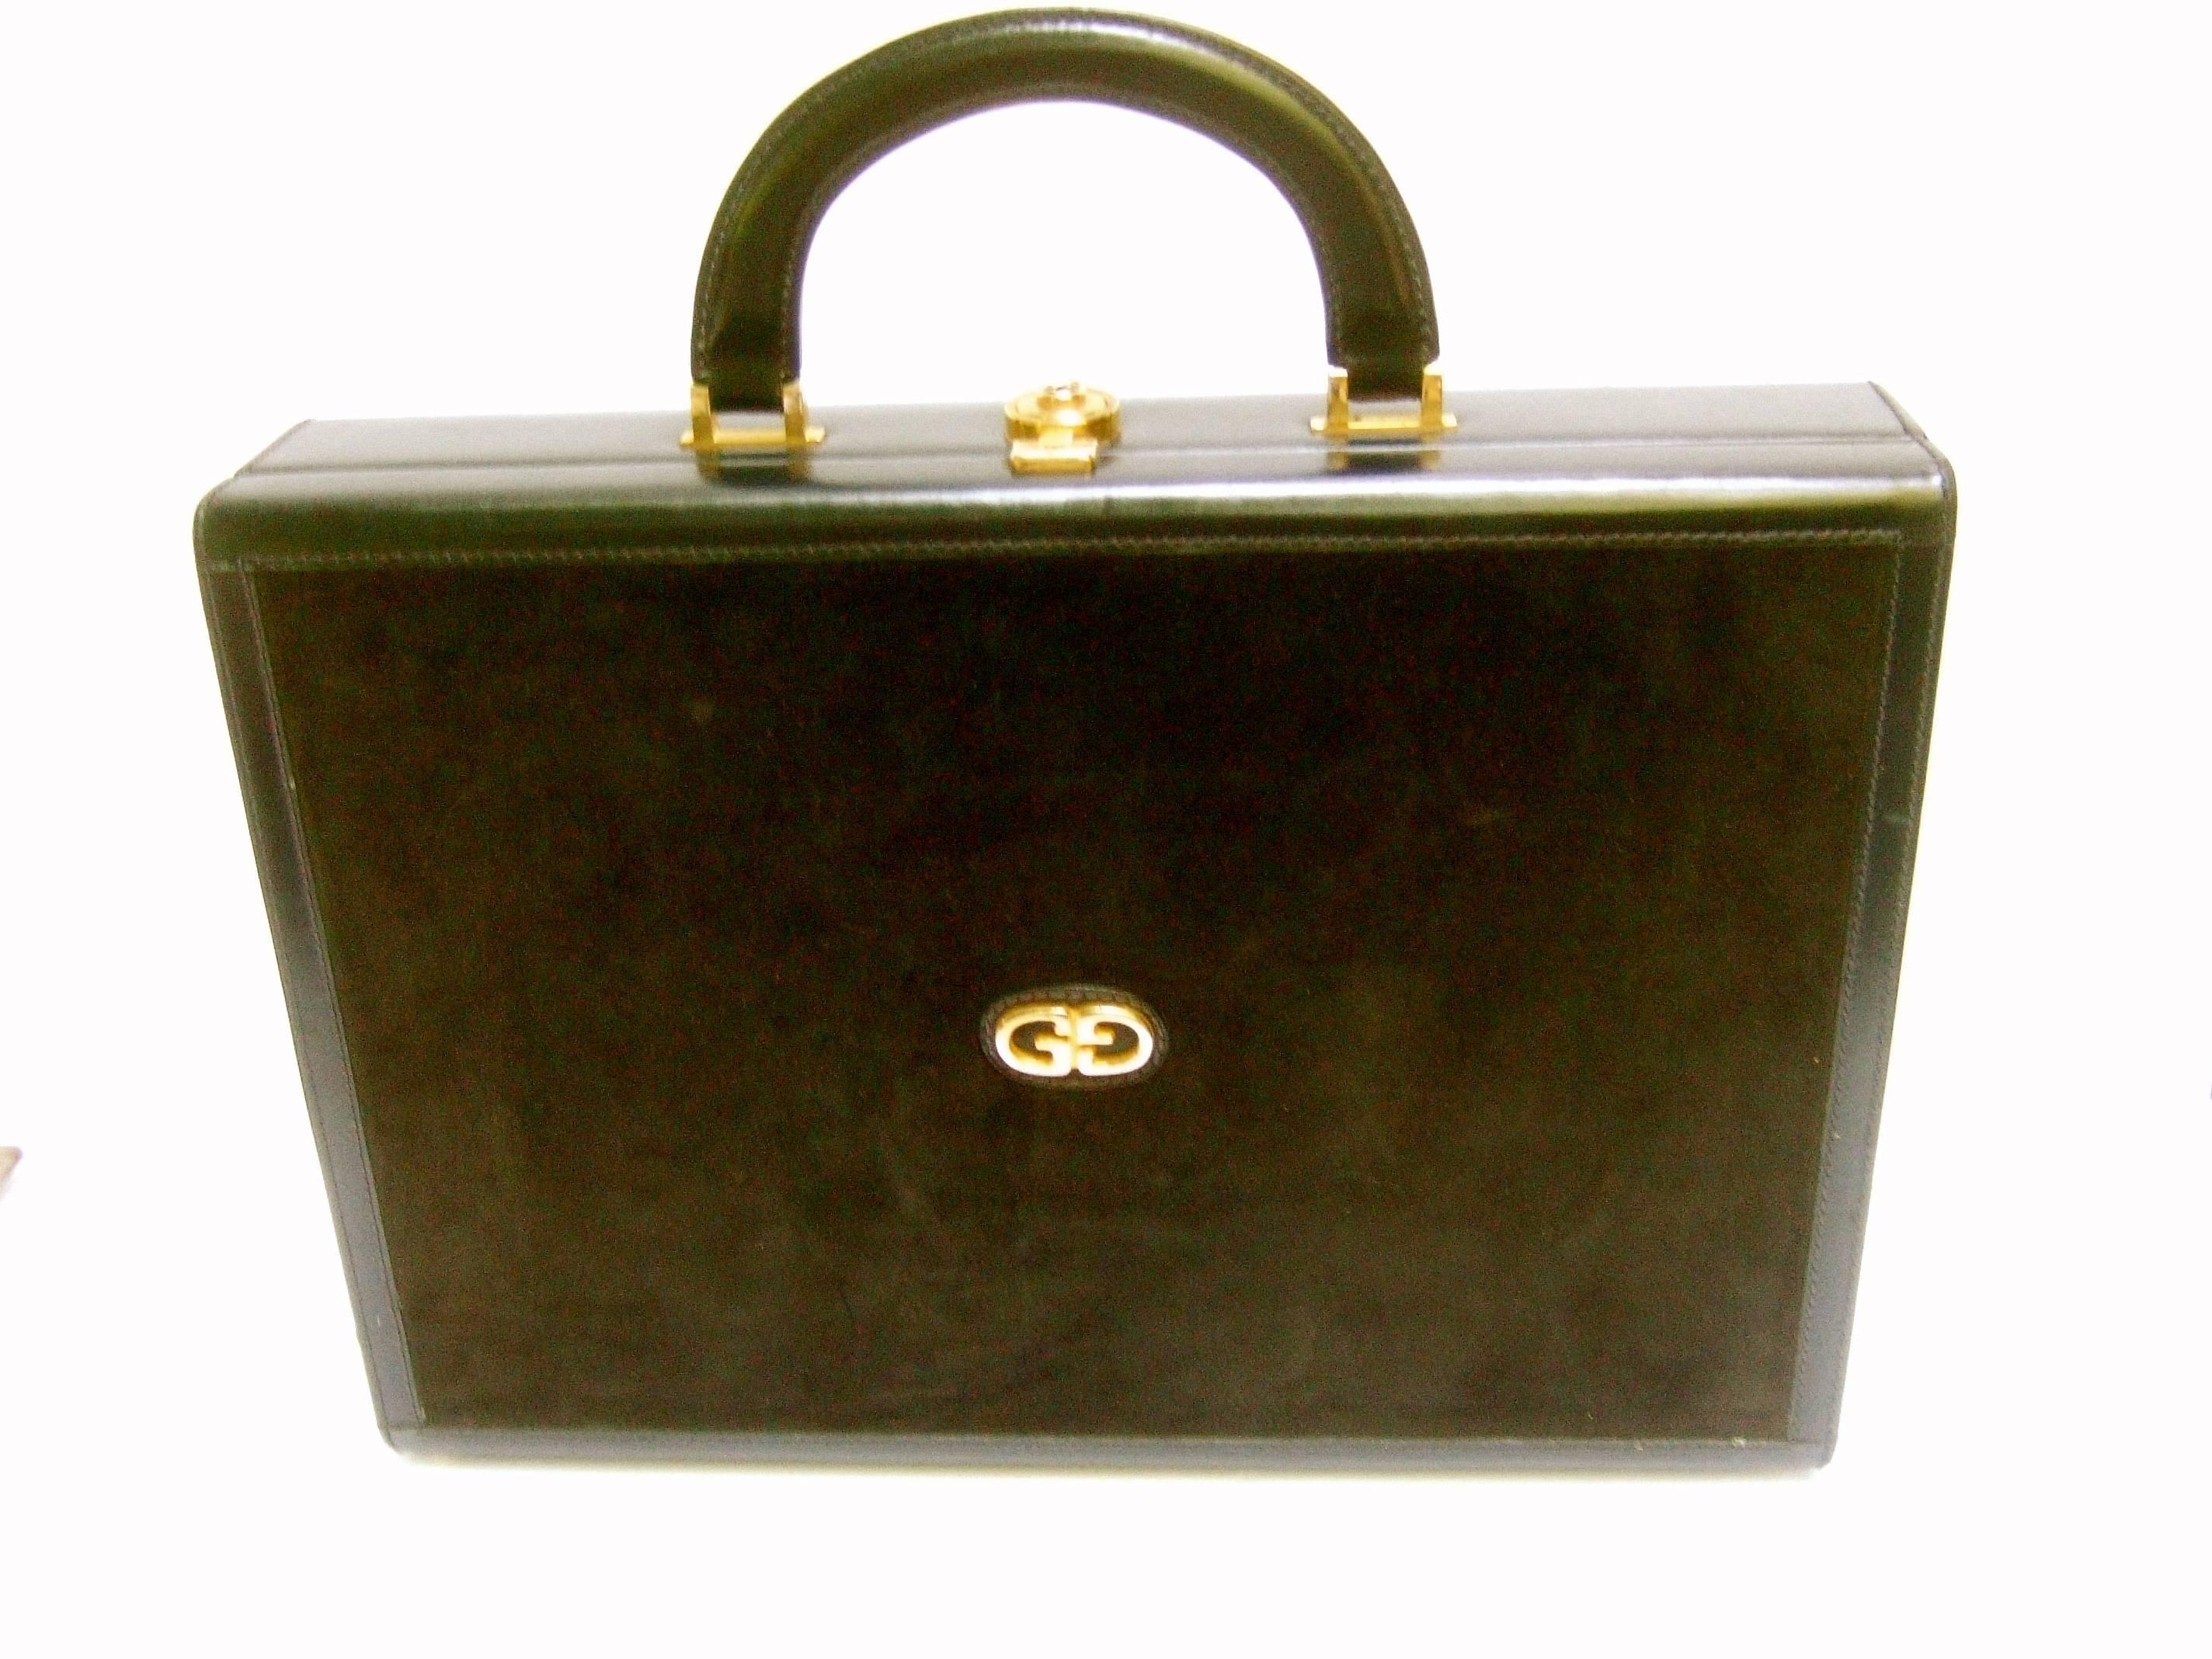 Gucci Luxurious Black Suede & Leather Briefcase circa 1970s 4